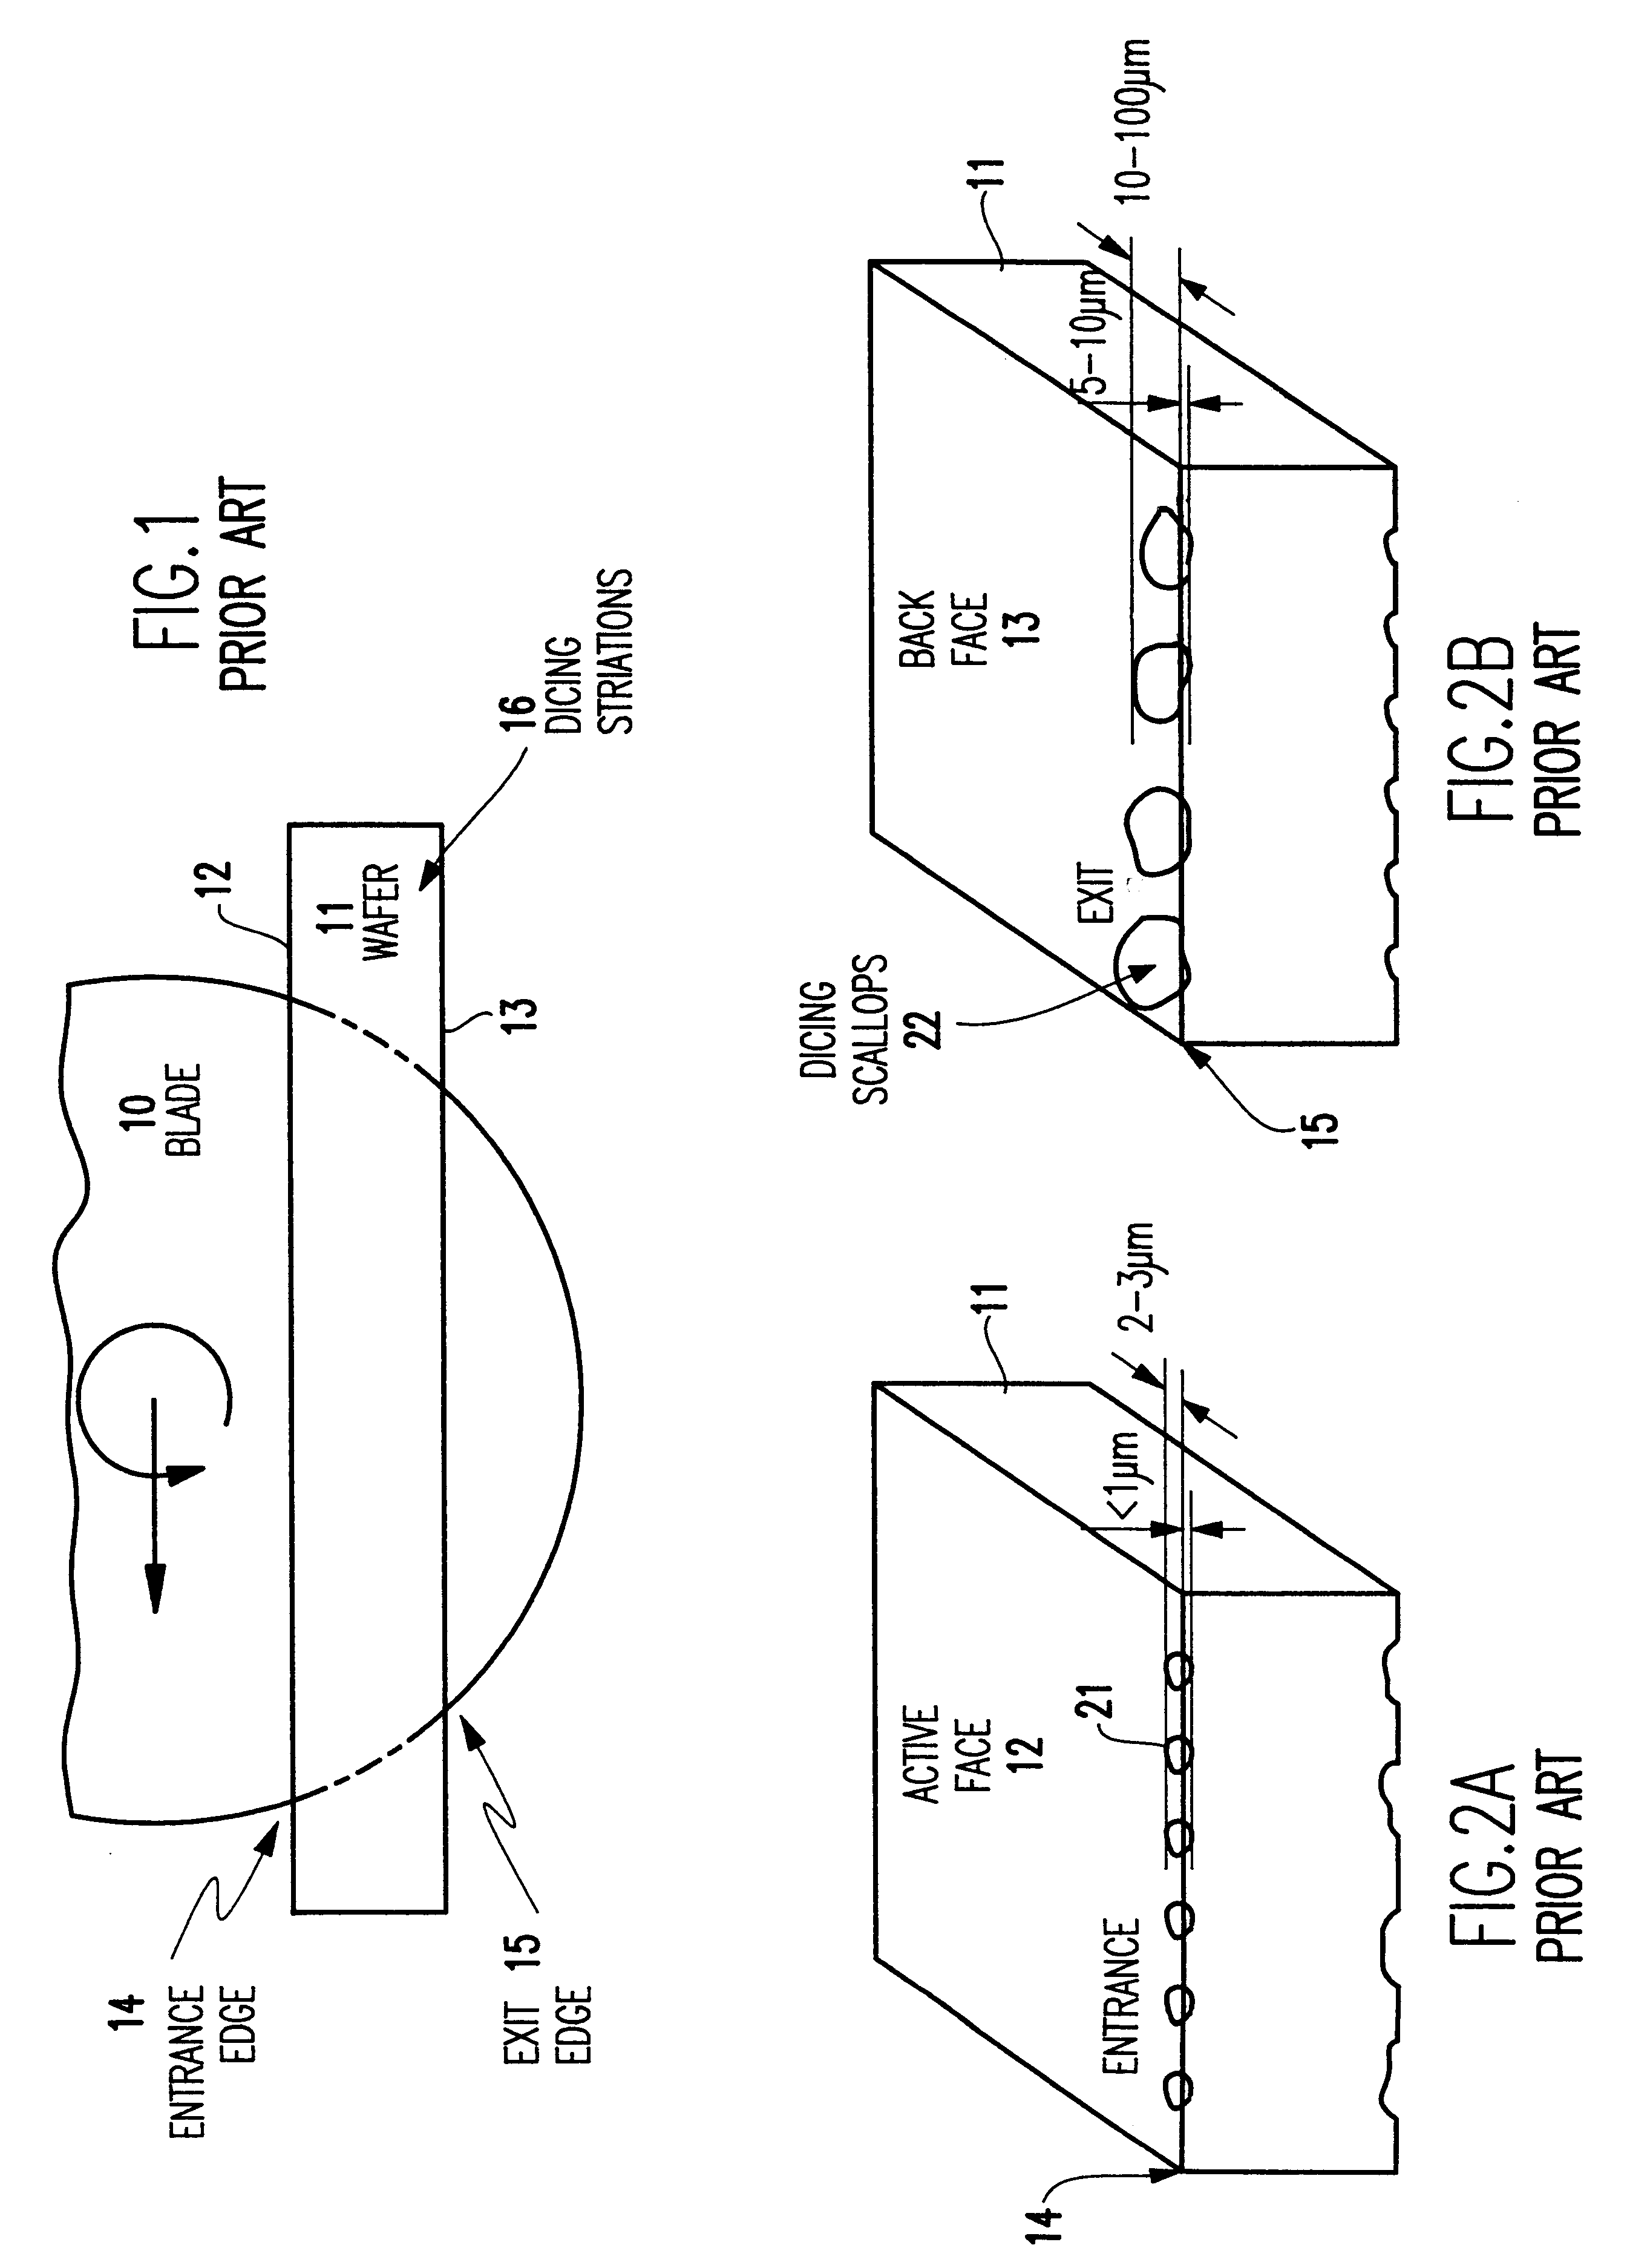 Method and system for dicing wafers, and semiconductor structures incorporating the products thereof